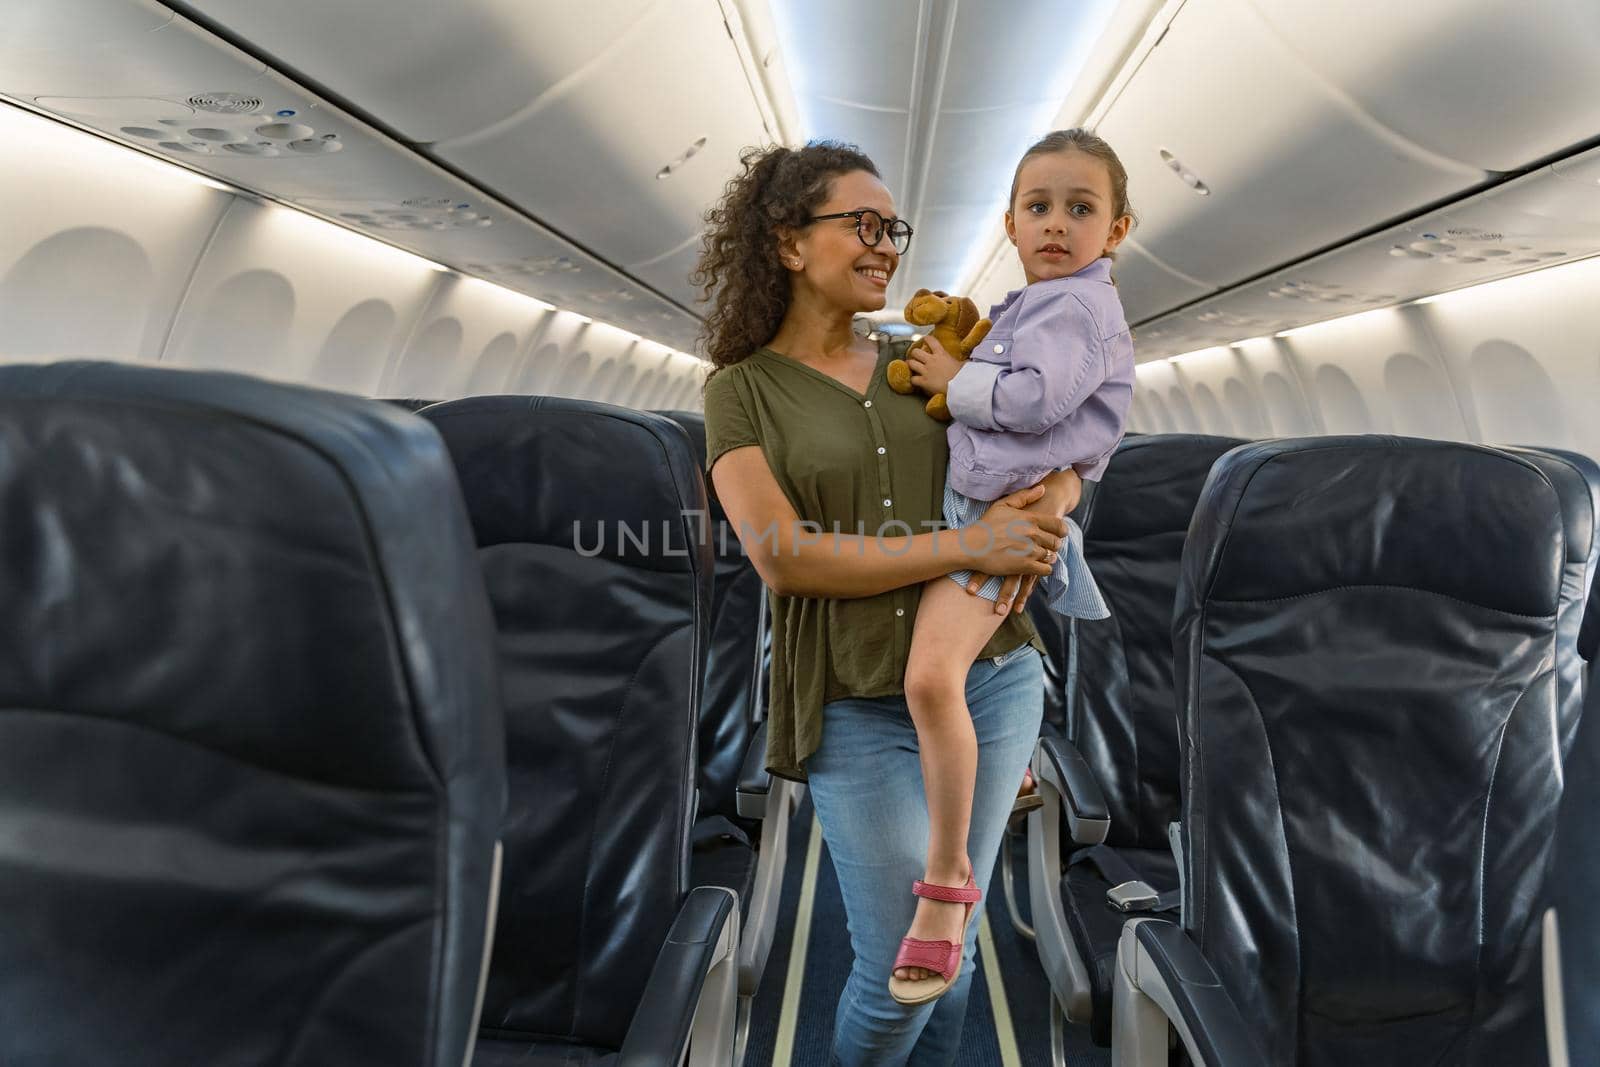 Mom holding her daughter in her arms in the aisle near the seats on the plane by Yaroslav_astakhov